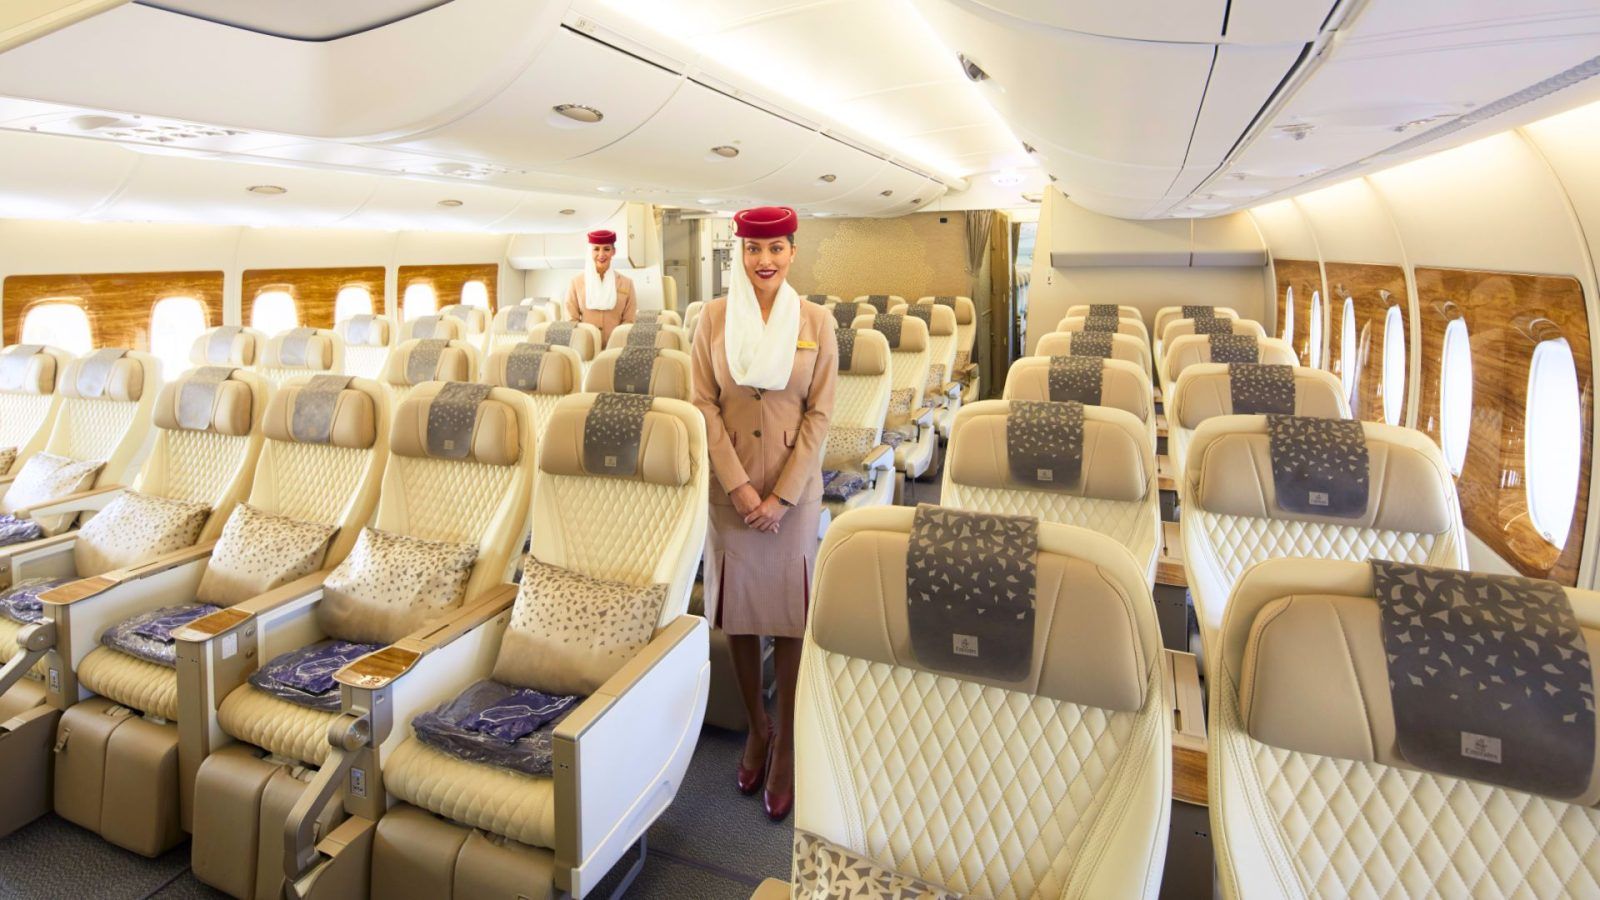 What's the Difference Between Premium Economy and Economy Plus?